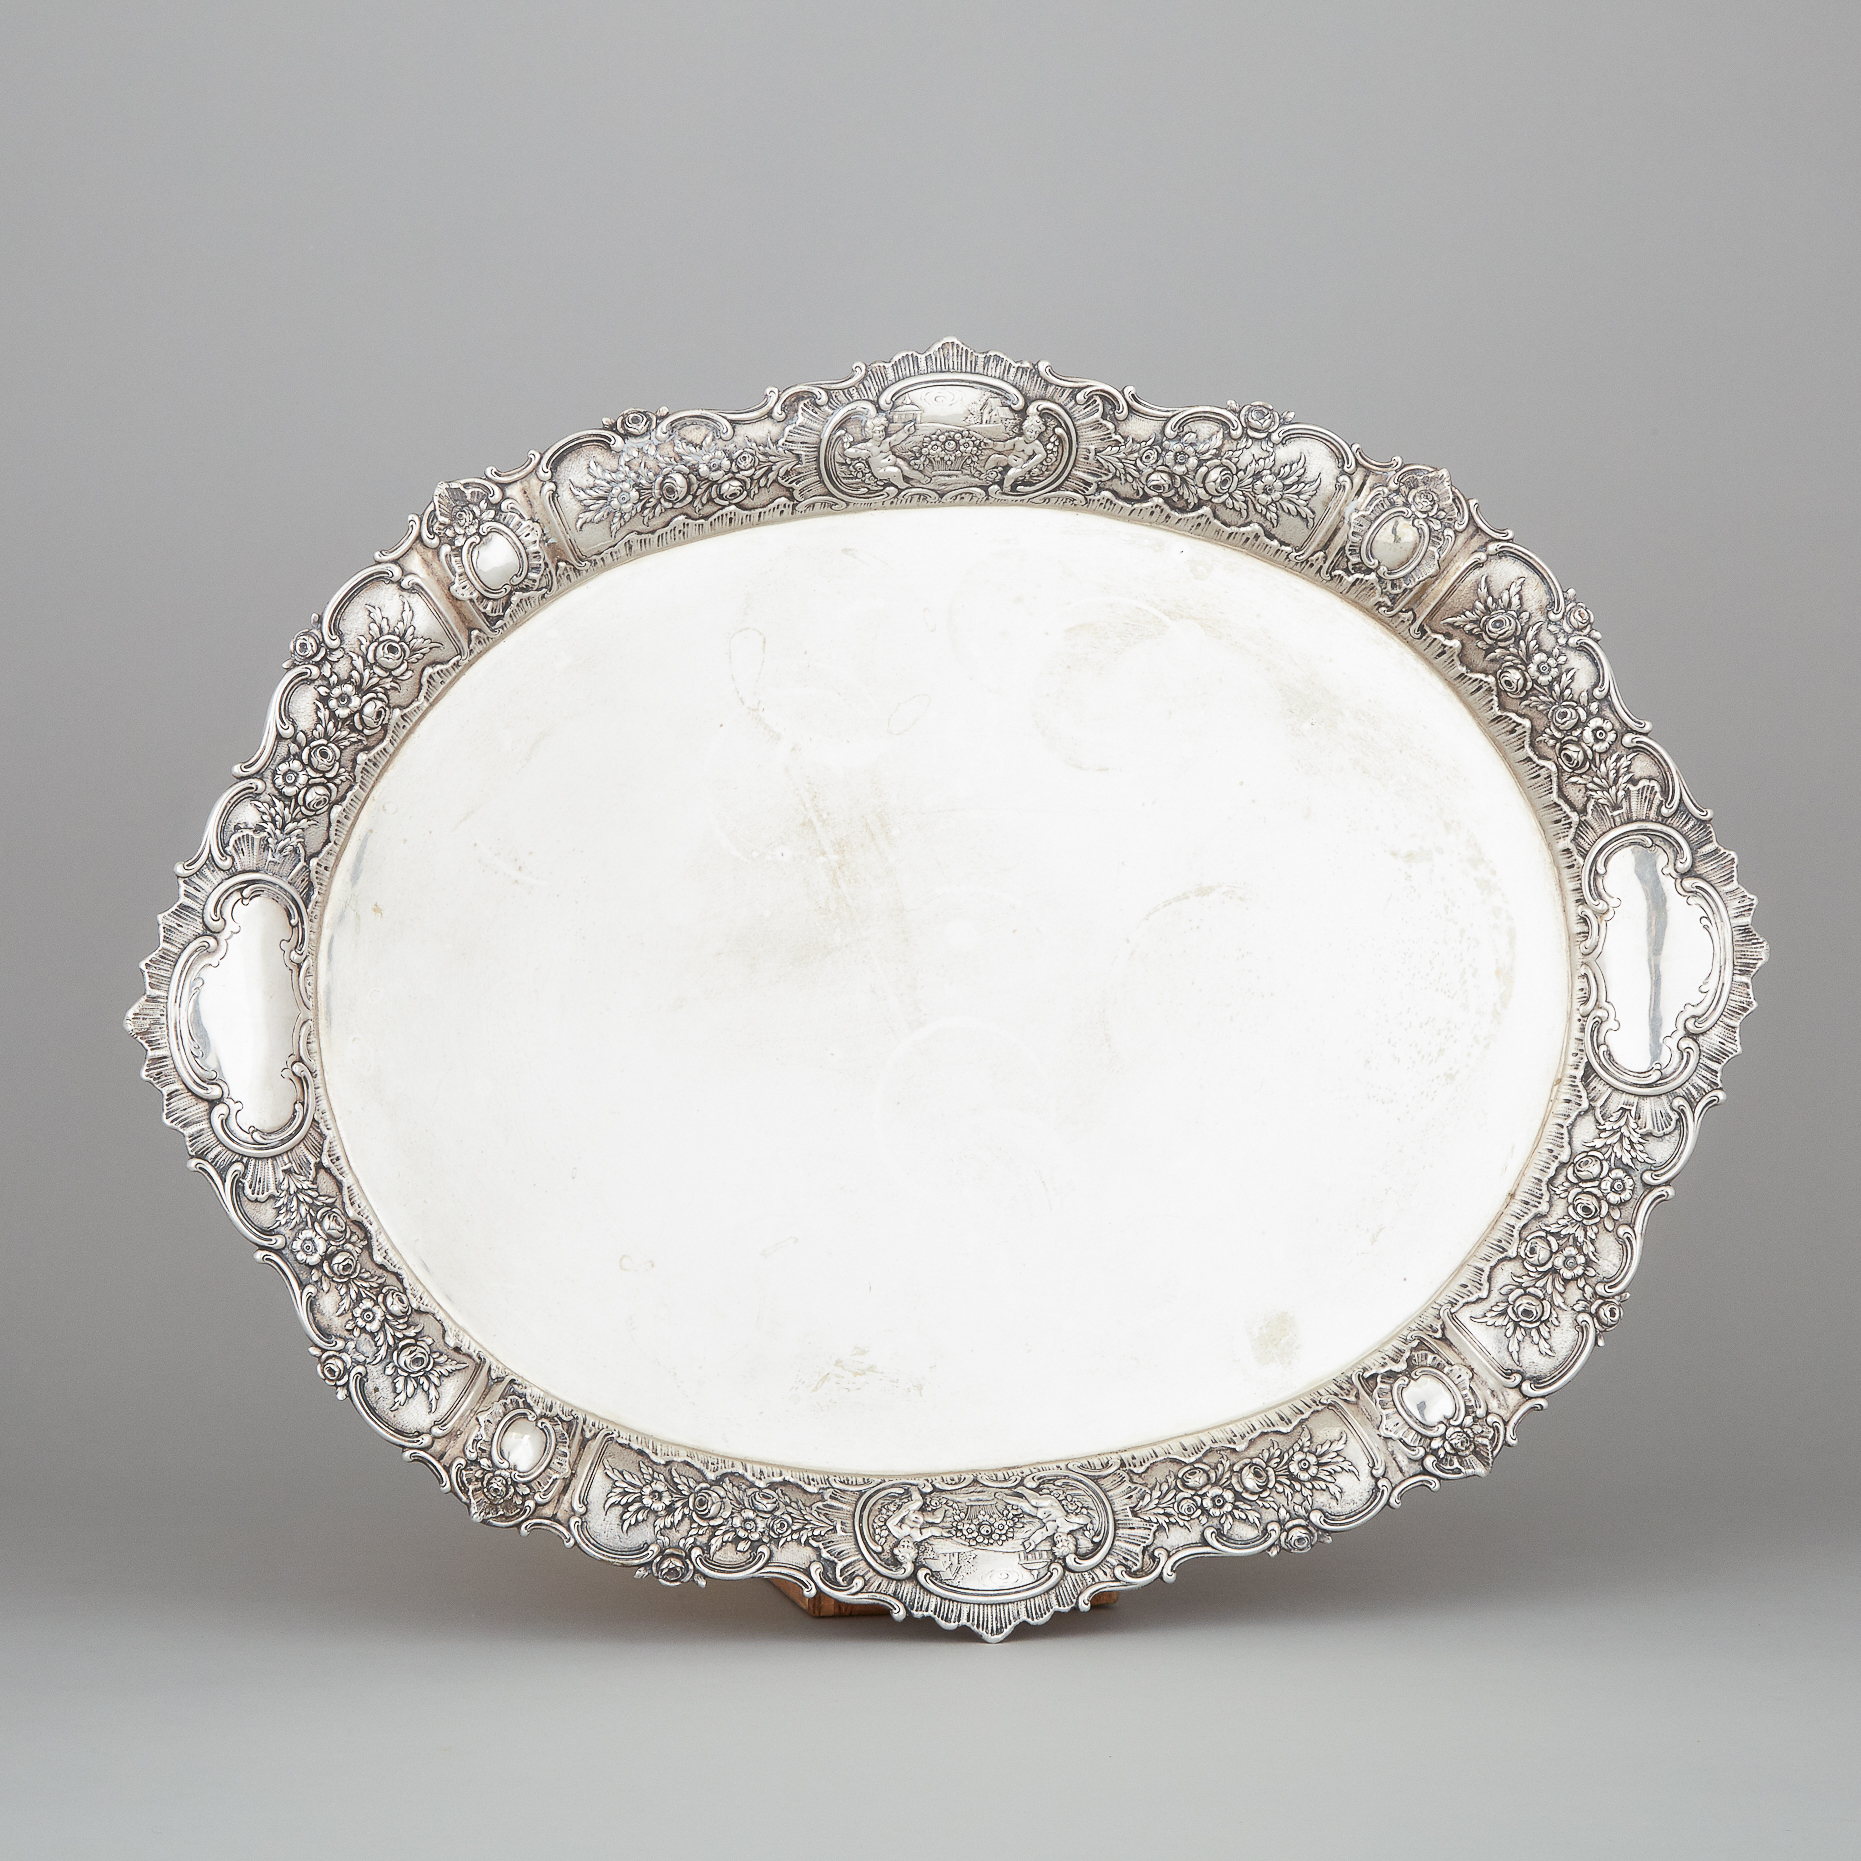 German Silver Oval Serving Tray, early 20th century